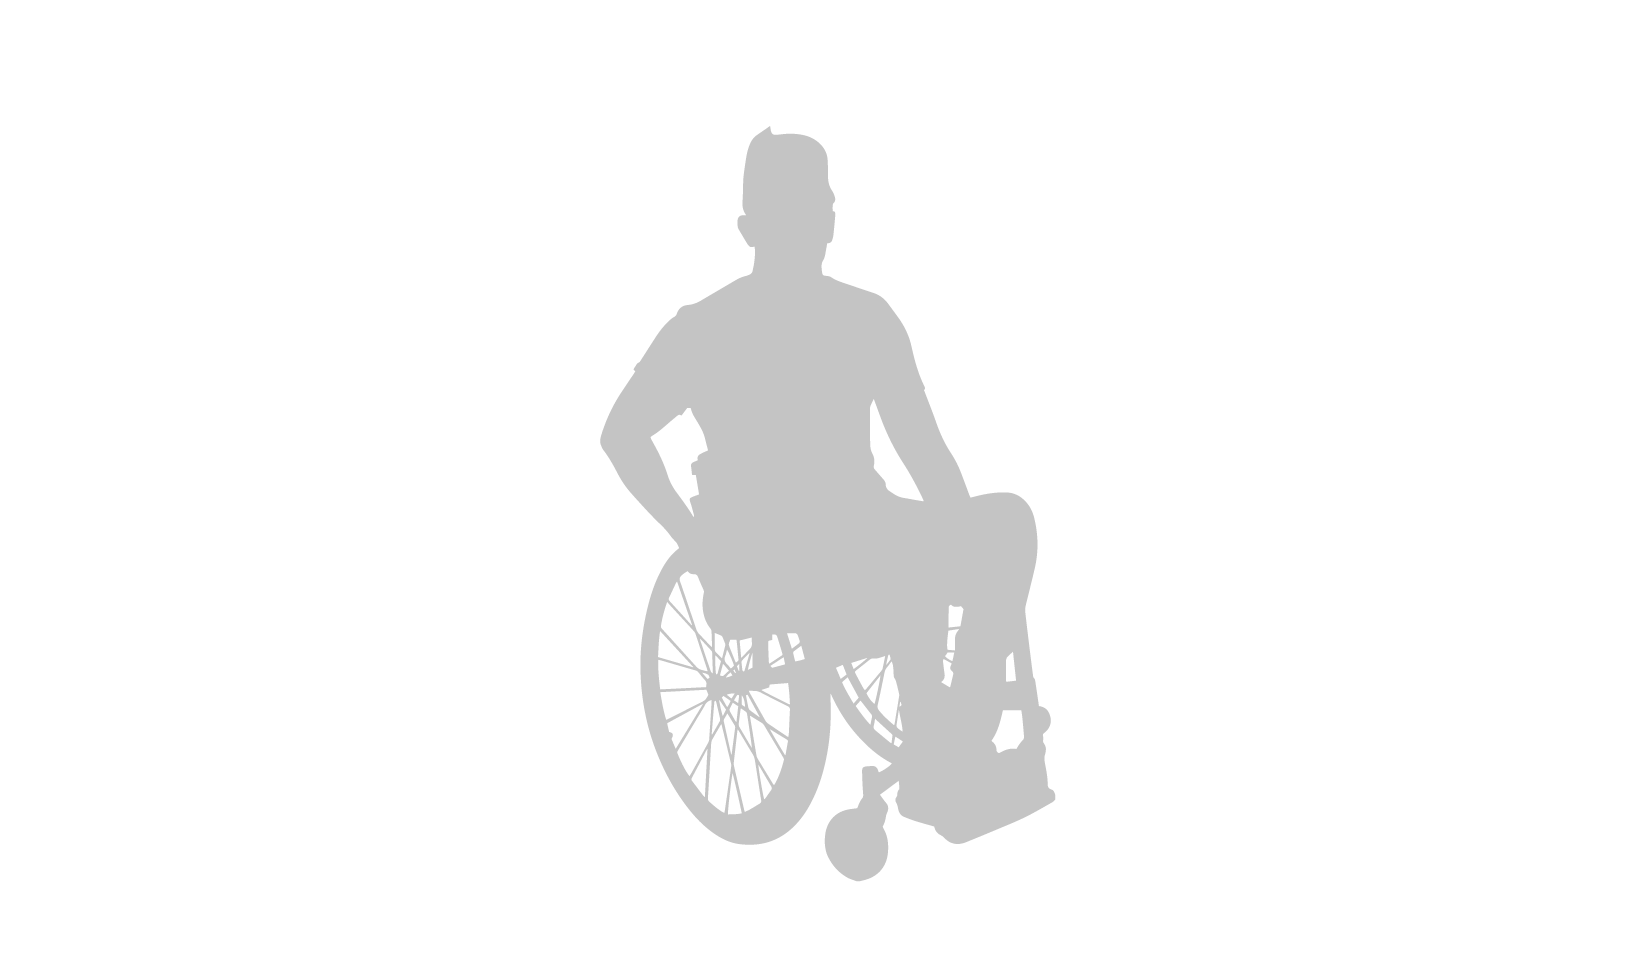 Shadowed nondescript image of a man seating in a manual wheelchair